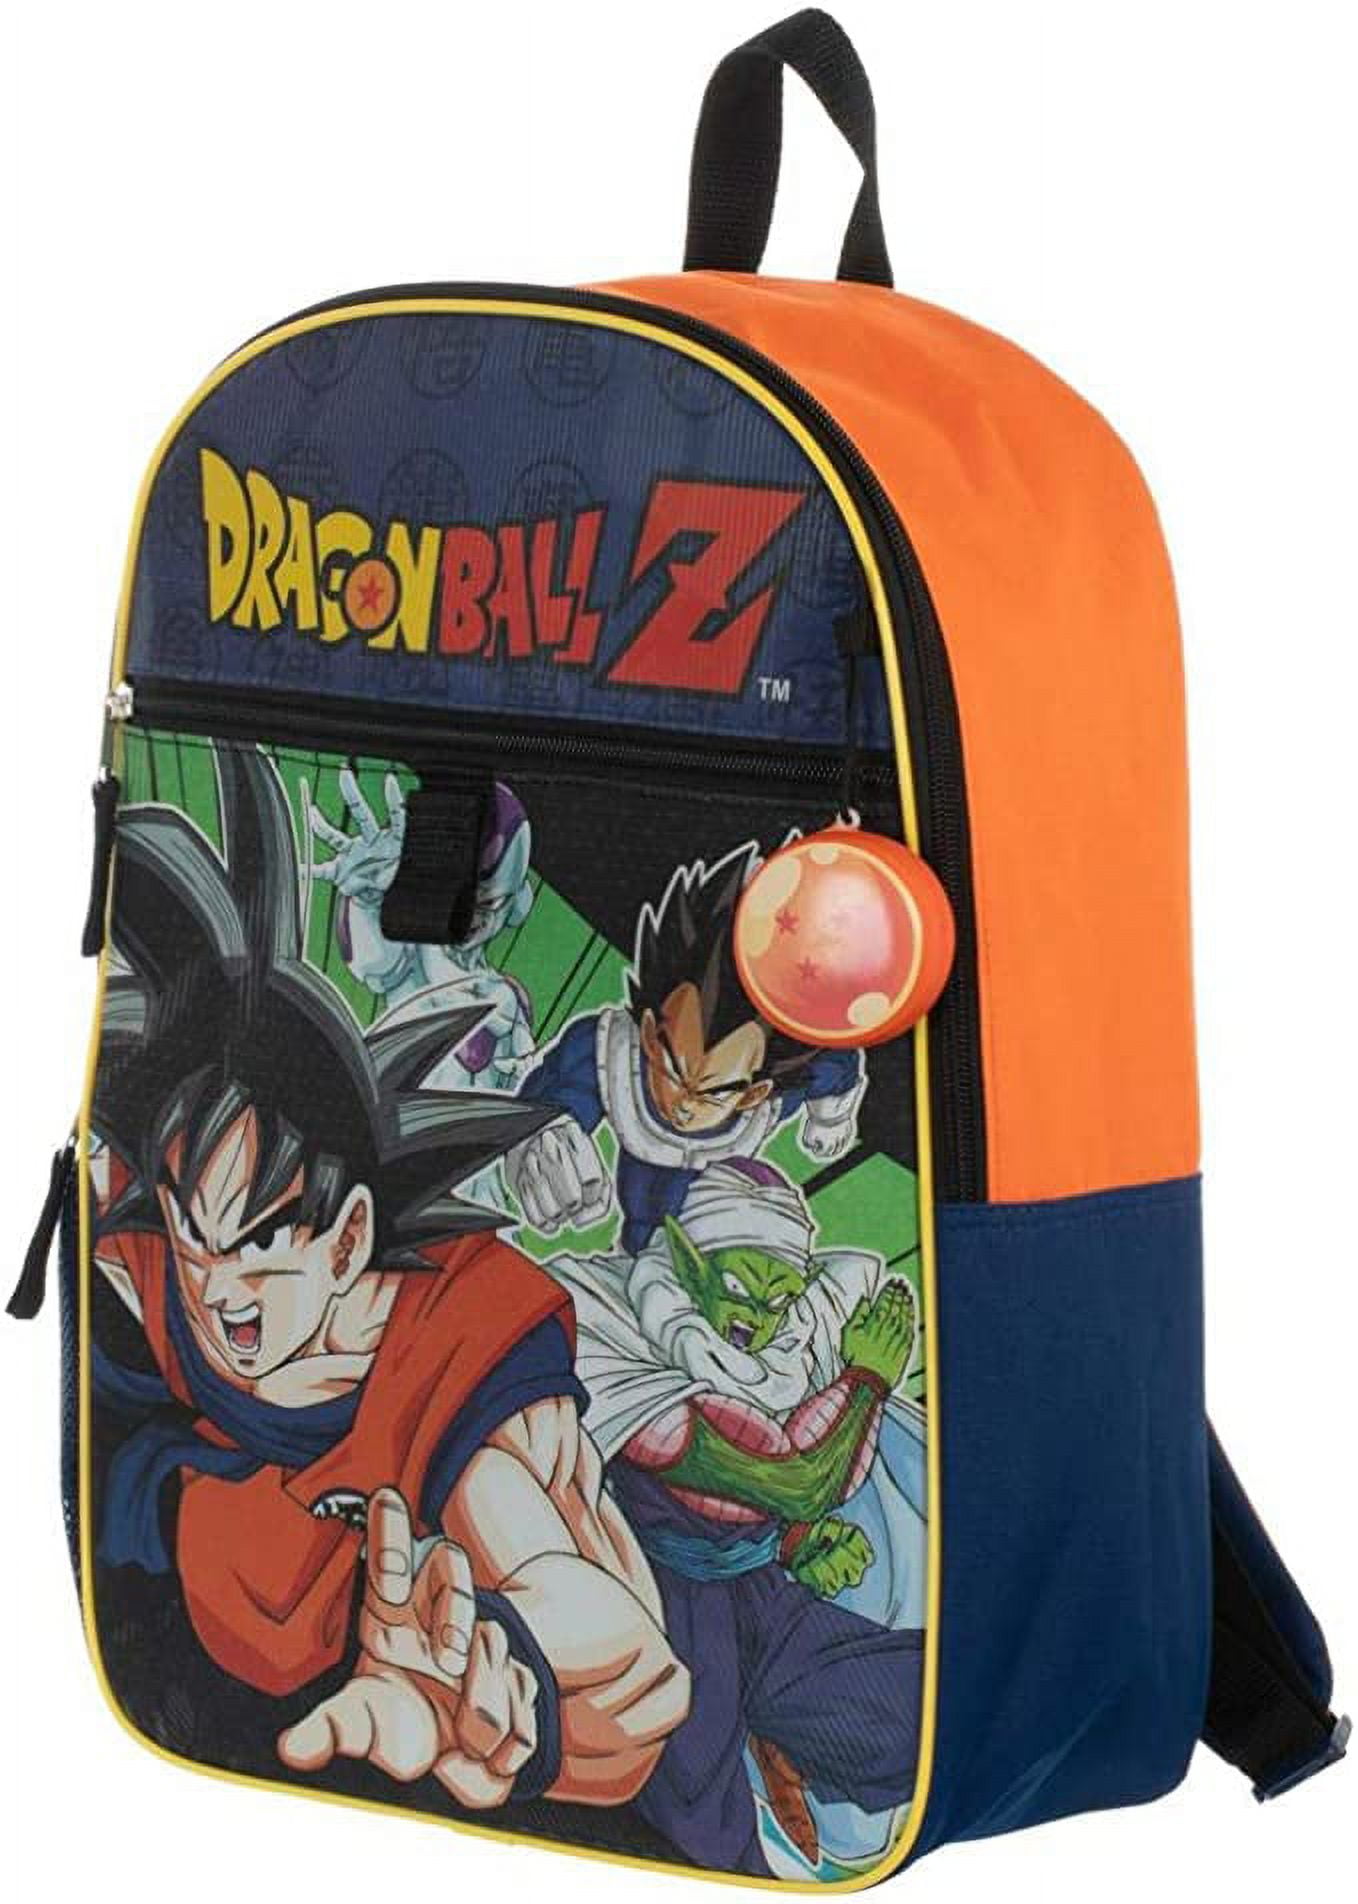 Screen Legends Dragon Ball Z Backpack and Lunch Box Set - Bundle with 16” Dragon Ball Backpack, Dragon Ball Lunch Bag, Stickers, More | Dragon Ball